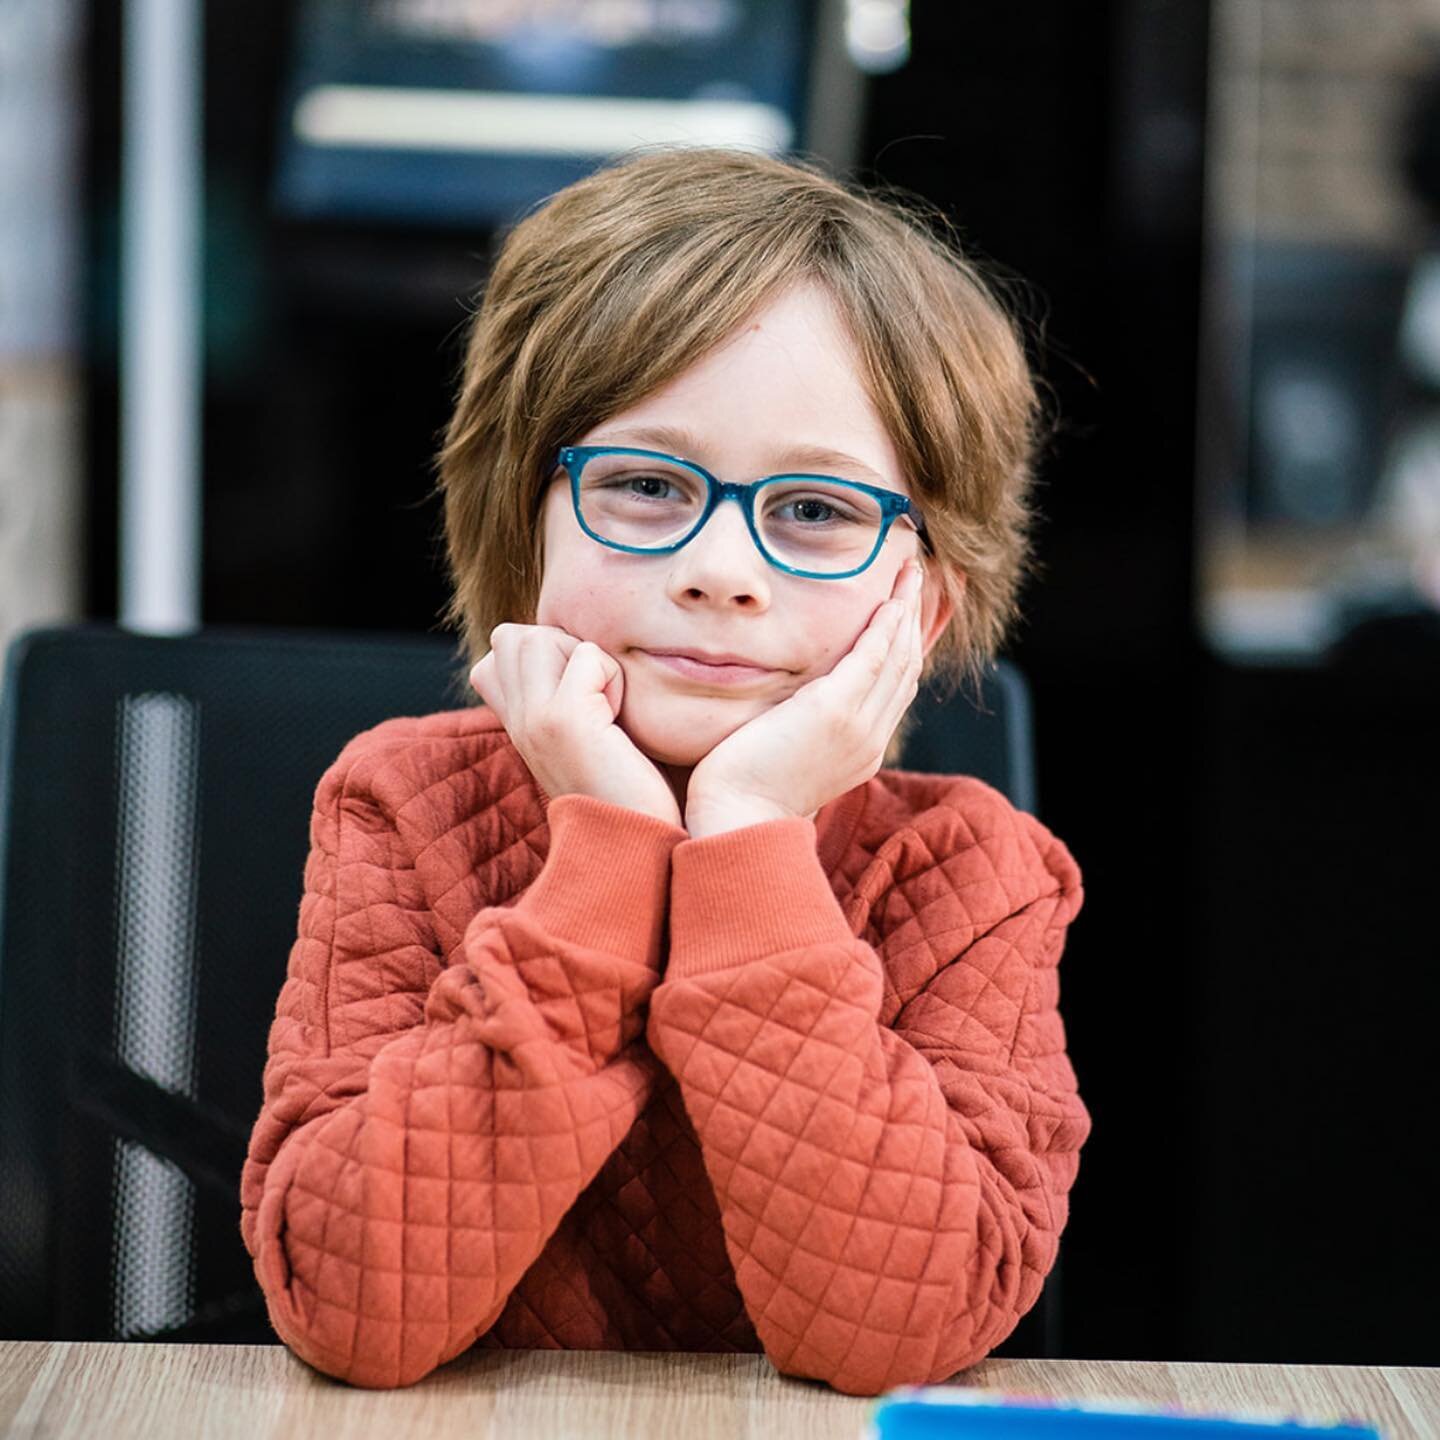 Did you know 1 in 17 preschoolers and 1 in 4 school age children require vision treatment? Many vision disorders can only be detected and treated through vision screening and eye examinations. We have appointments available over the school holidays. 